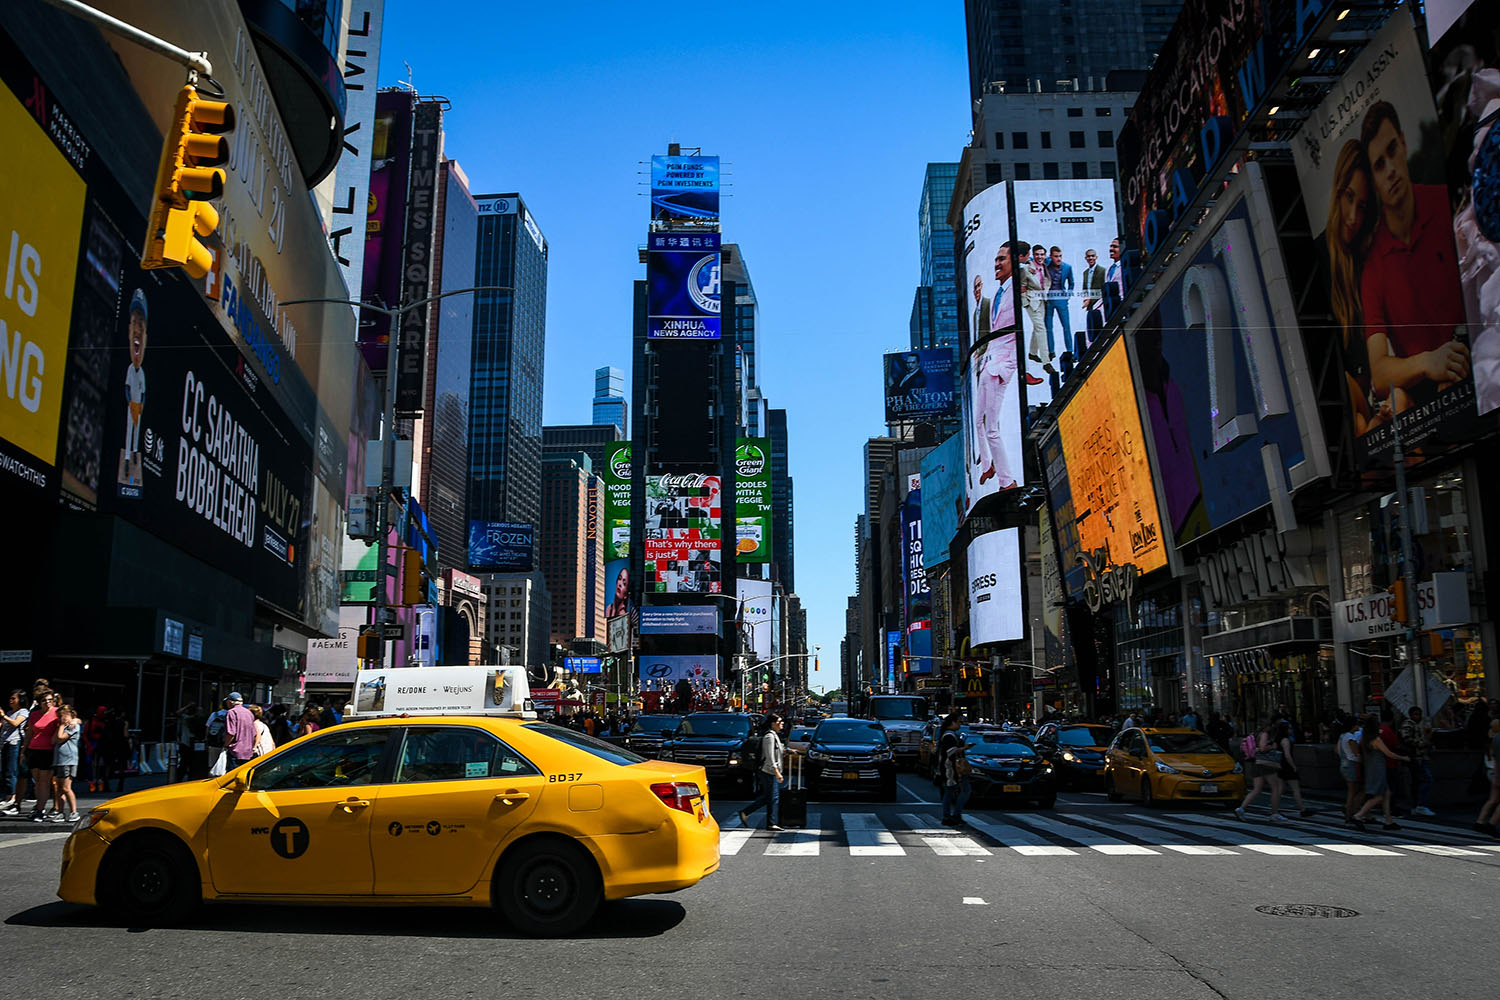 Travel Safety Tips NYC Taxi Times Square